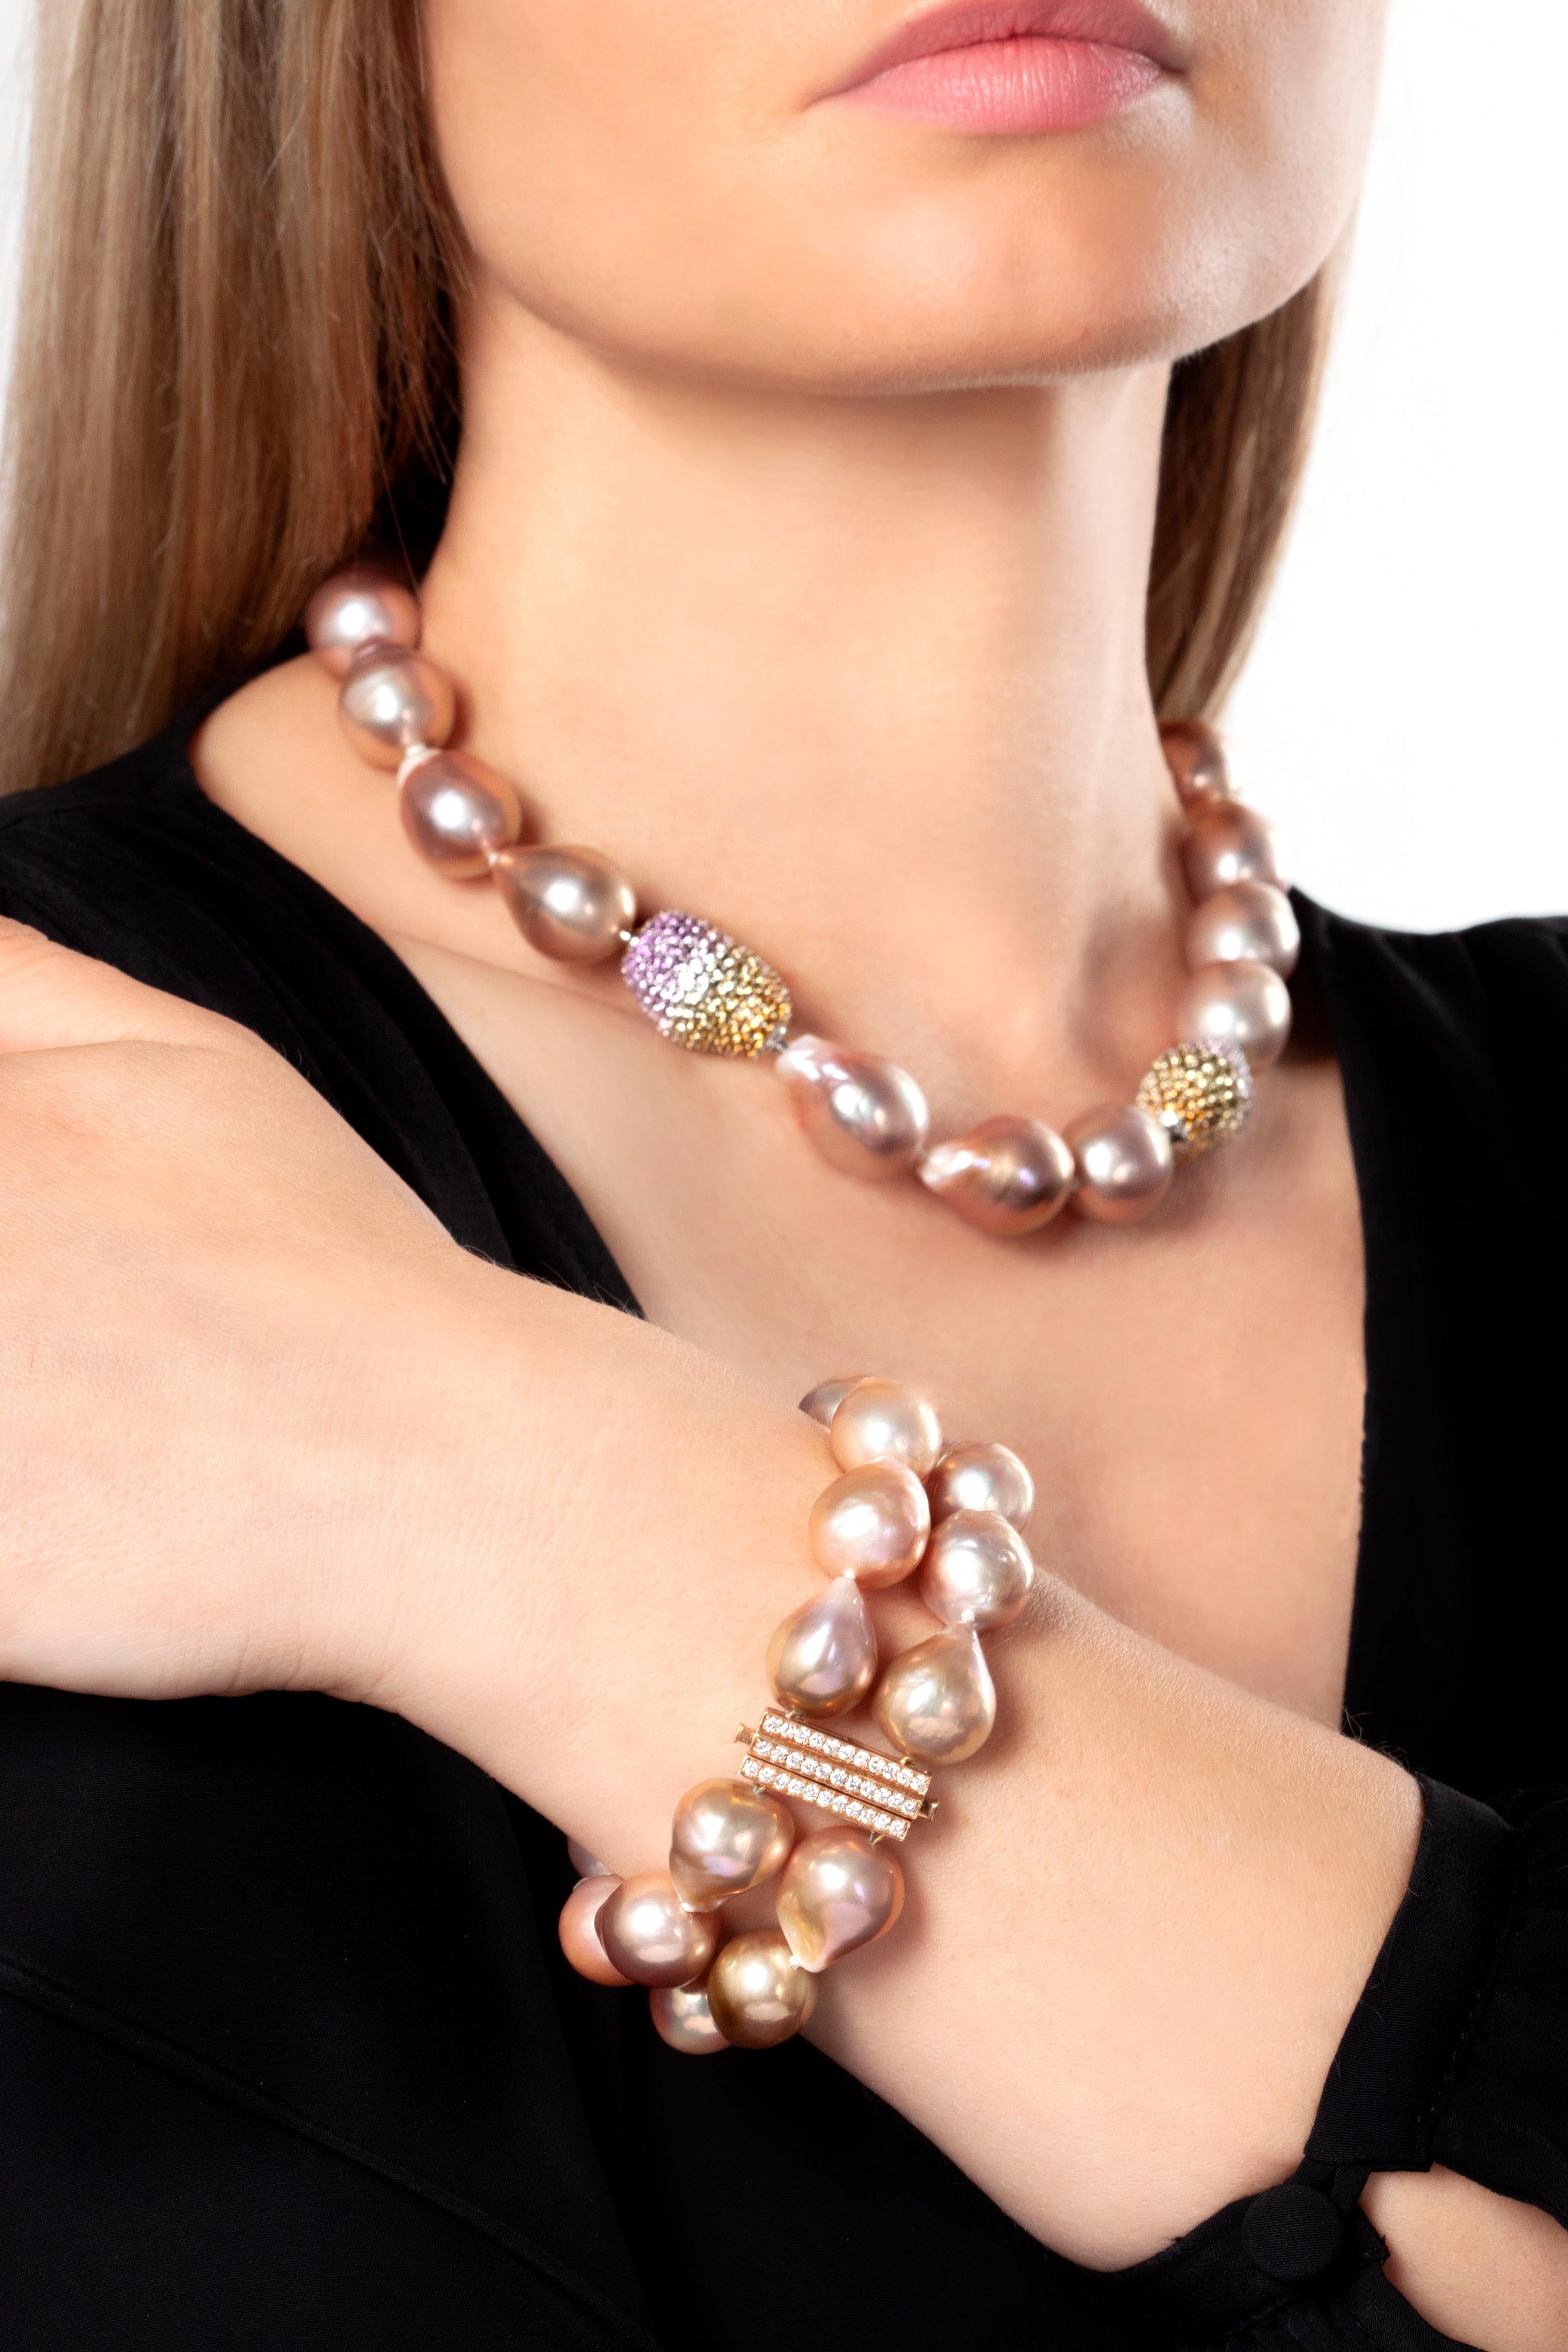 This hypnotic bracelet by Yoko London features two rows of unique, pink baroque pearls. Each baroque pearl is completely unique and this design perfectly highlights their allure and mystique. The rich, pink hues of the pearls are perfectly offset by